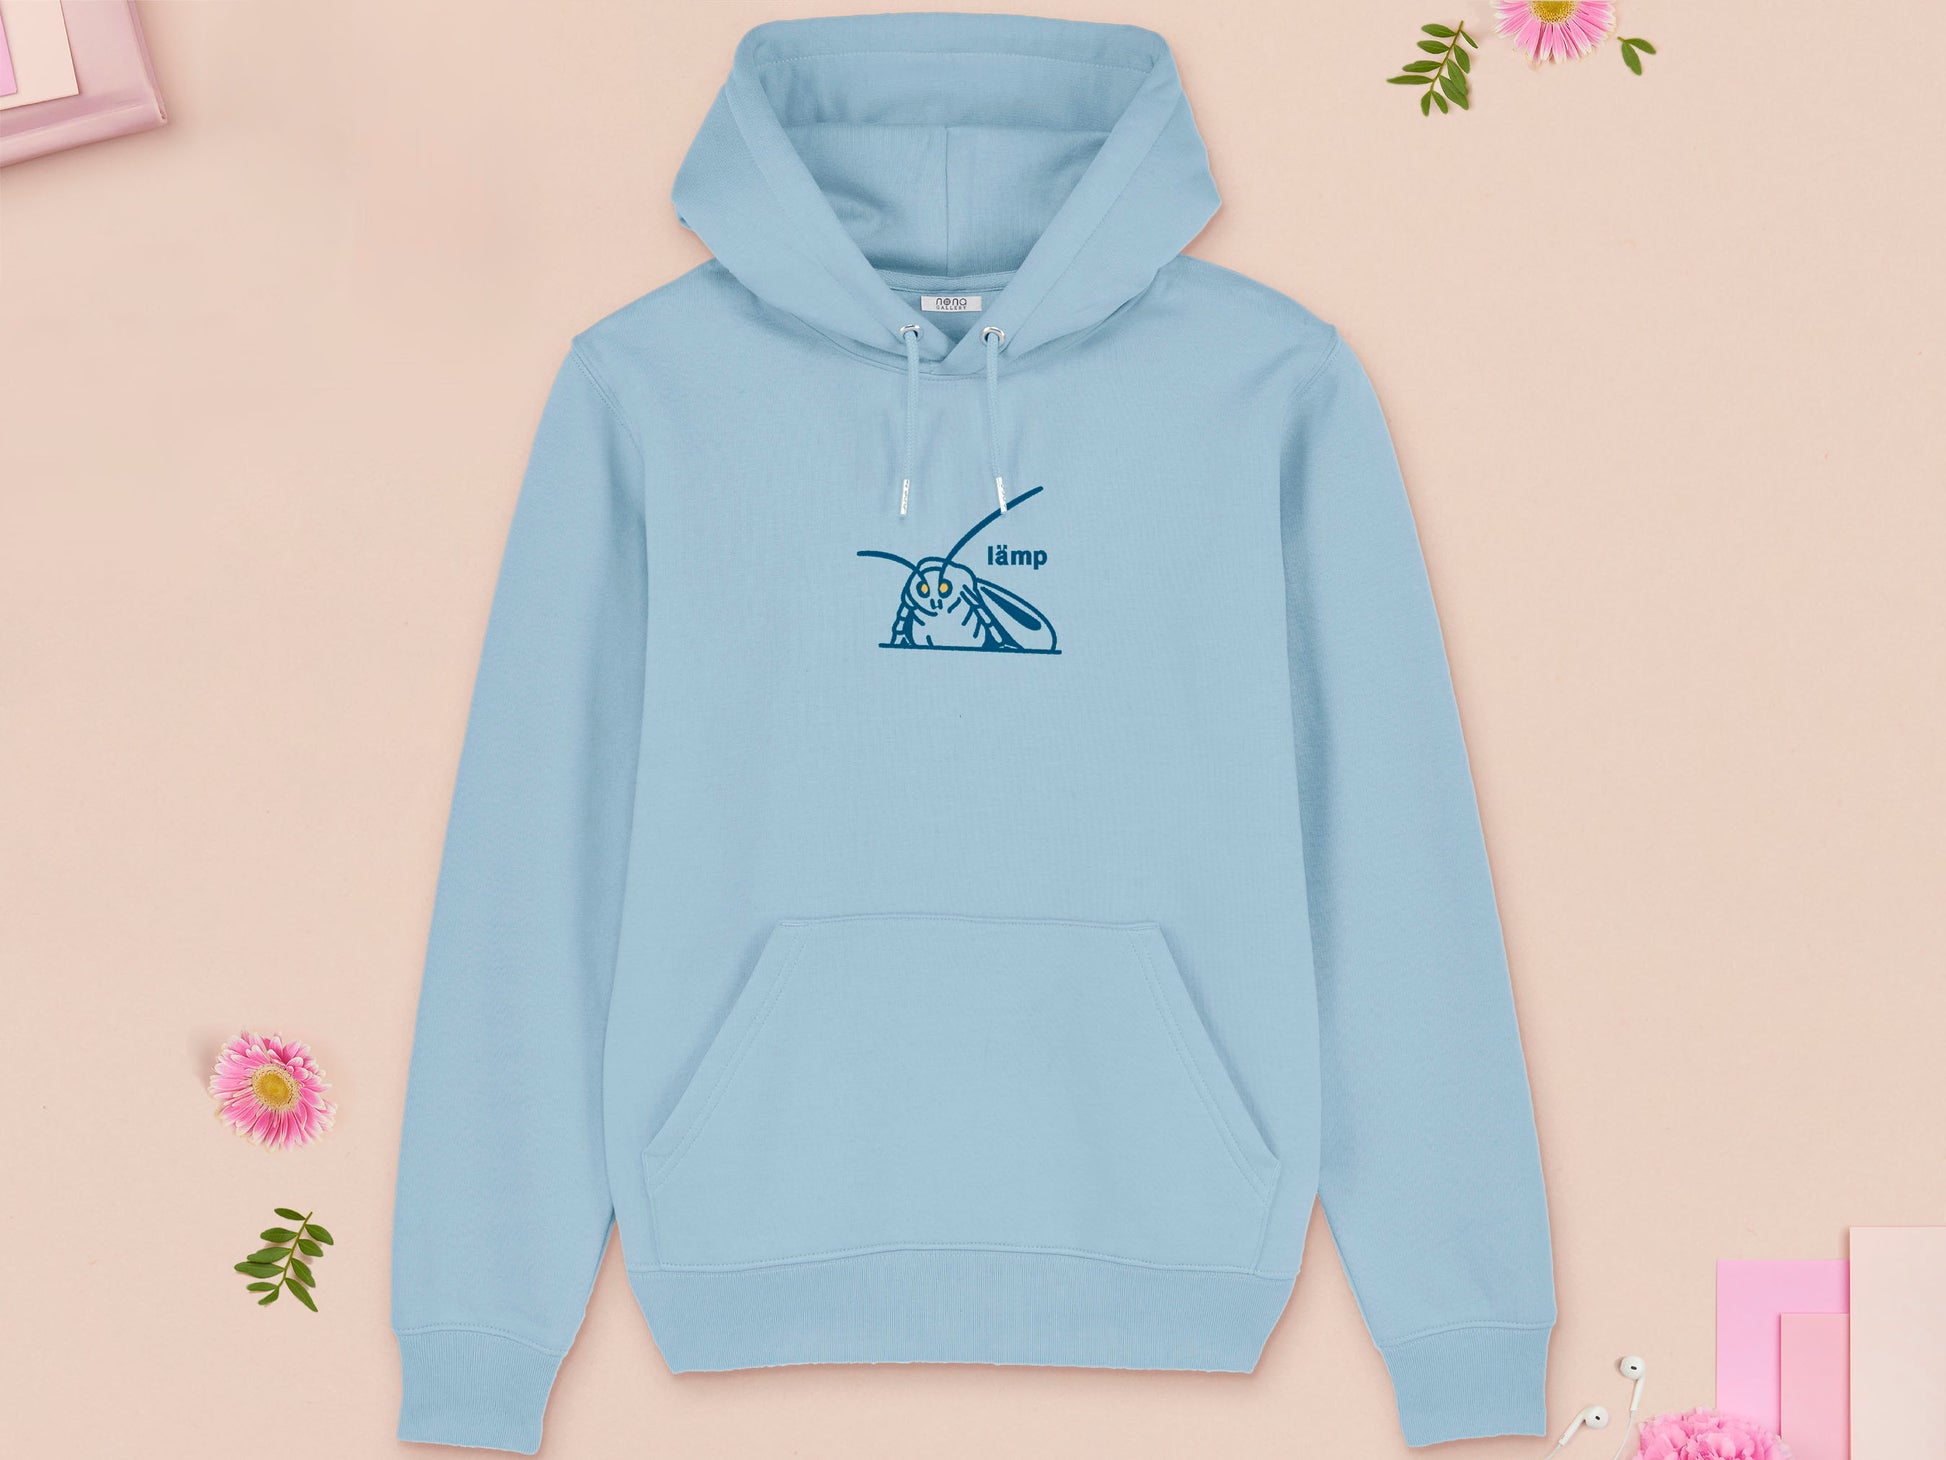 A blue long sleeve fleece hoodie, with an embroidered blue thread design of a moth with glowing yellow eyes and the word lämp